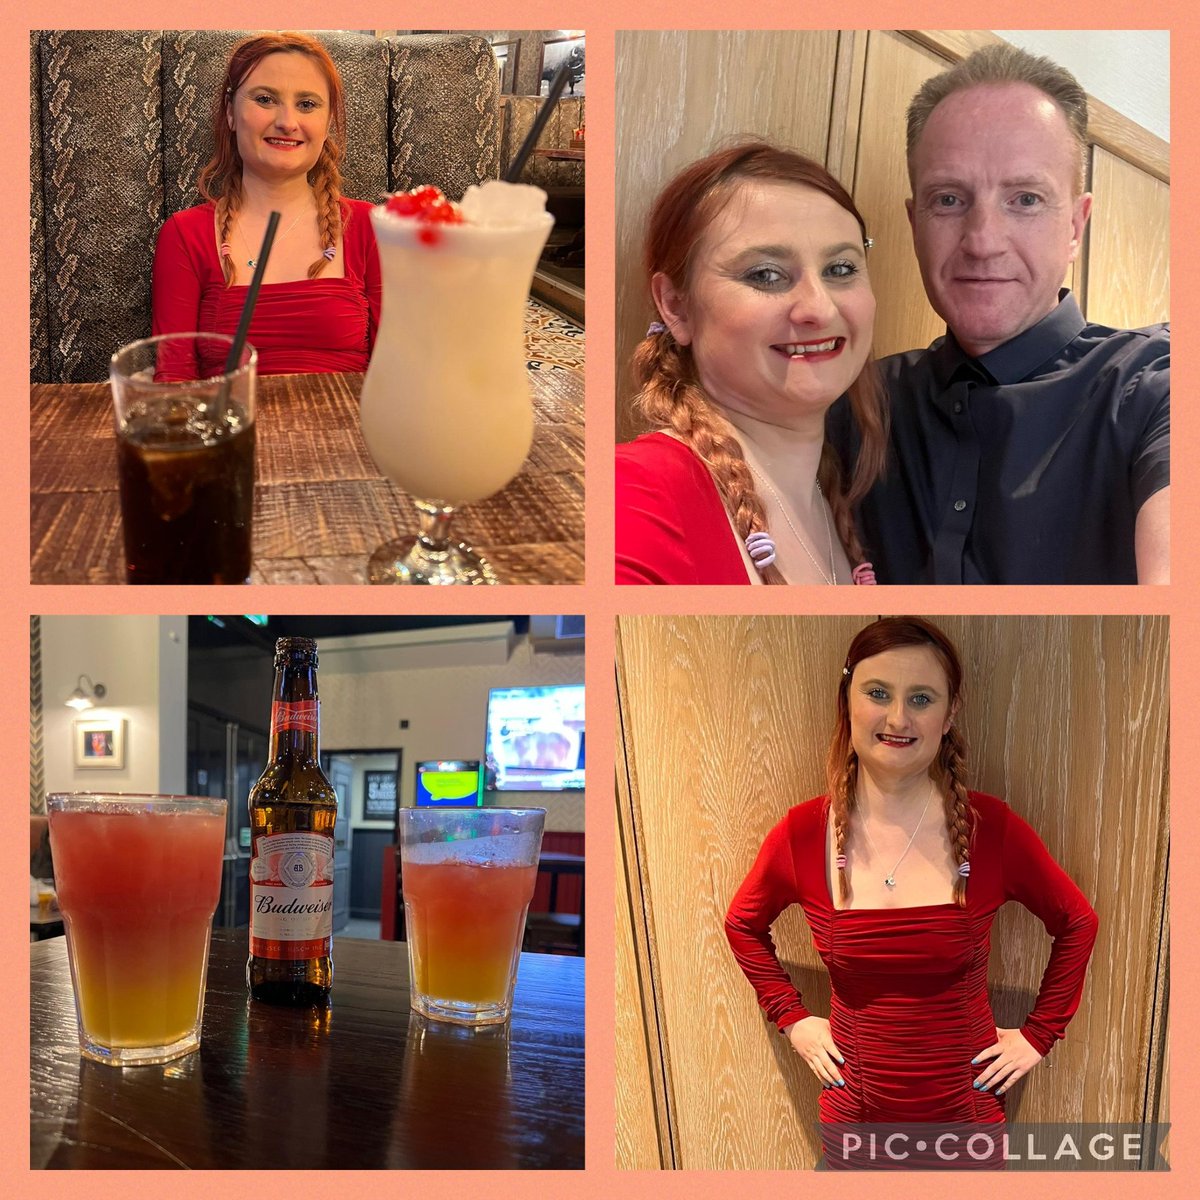 Enjoyed the weekend with my man @visitBlackpool 😘❤️